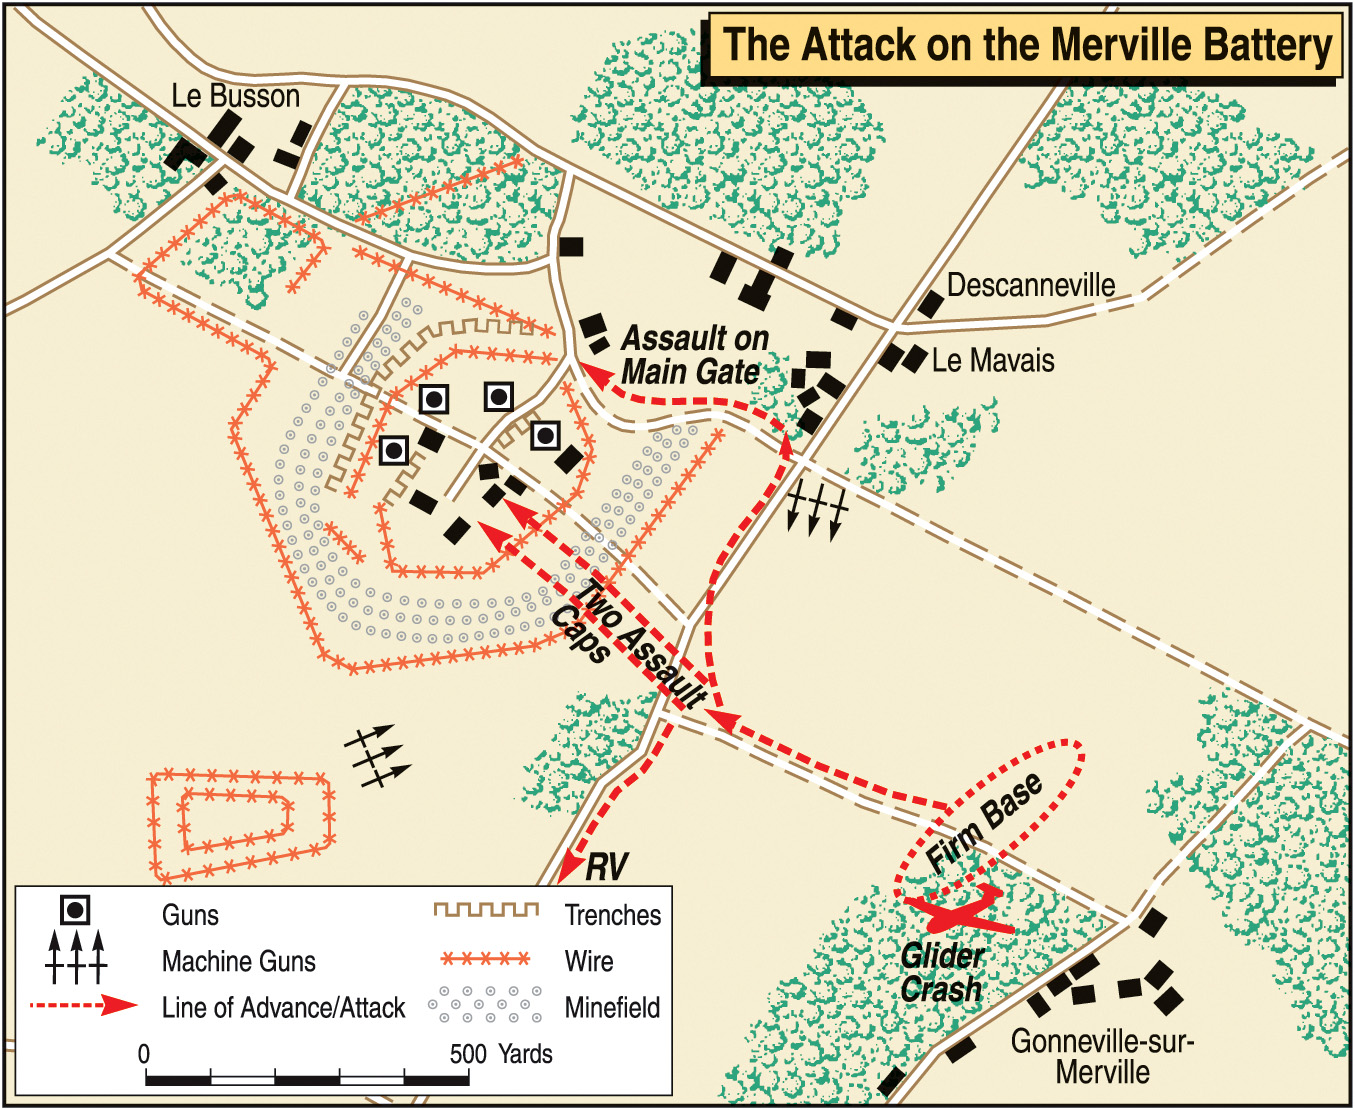 Protected by rings of barbed wire, land mines and machine-gun nests, the Merville Battery proved to be a “stinker” to attack.